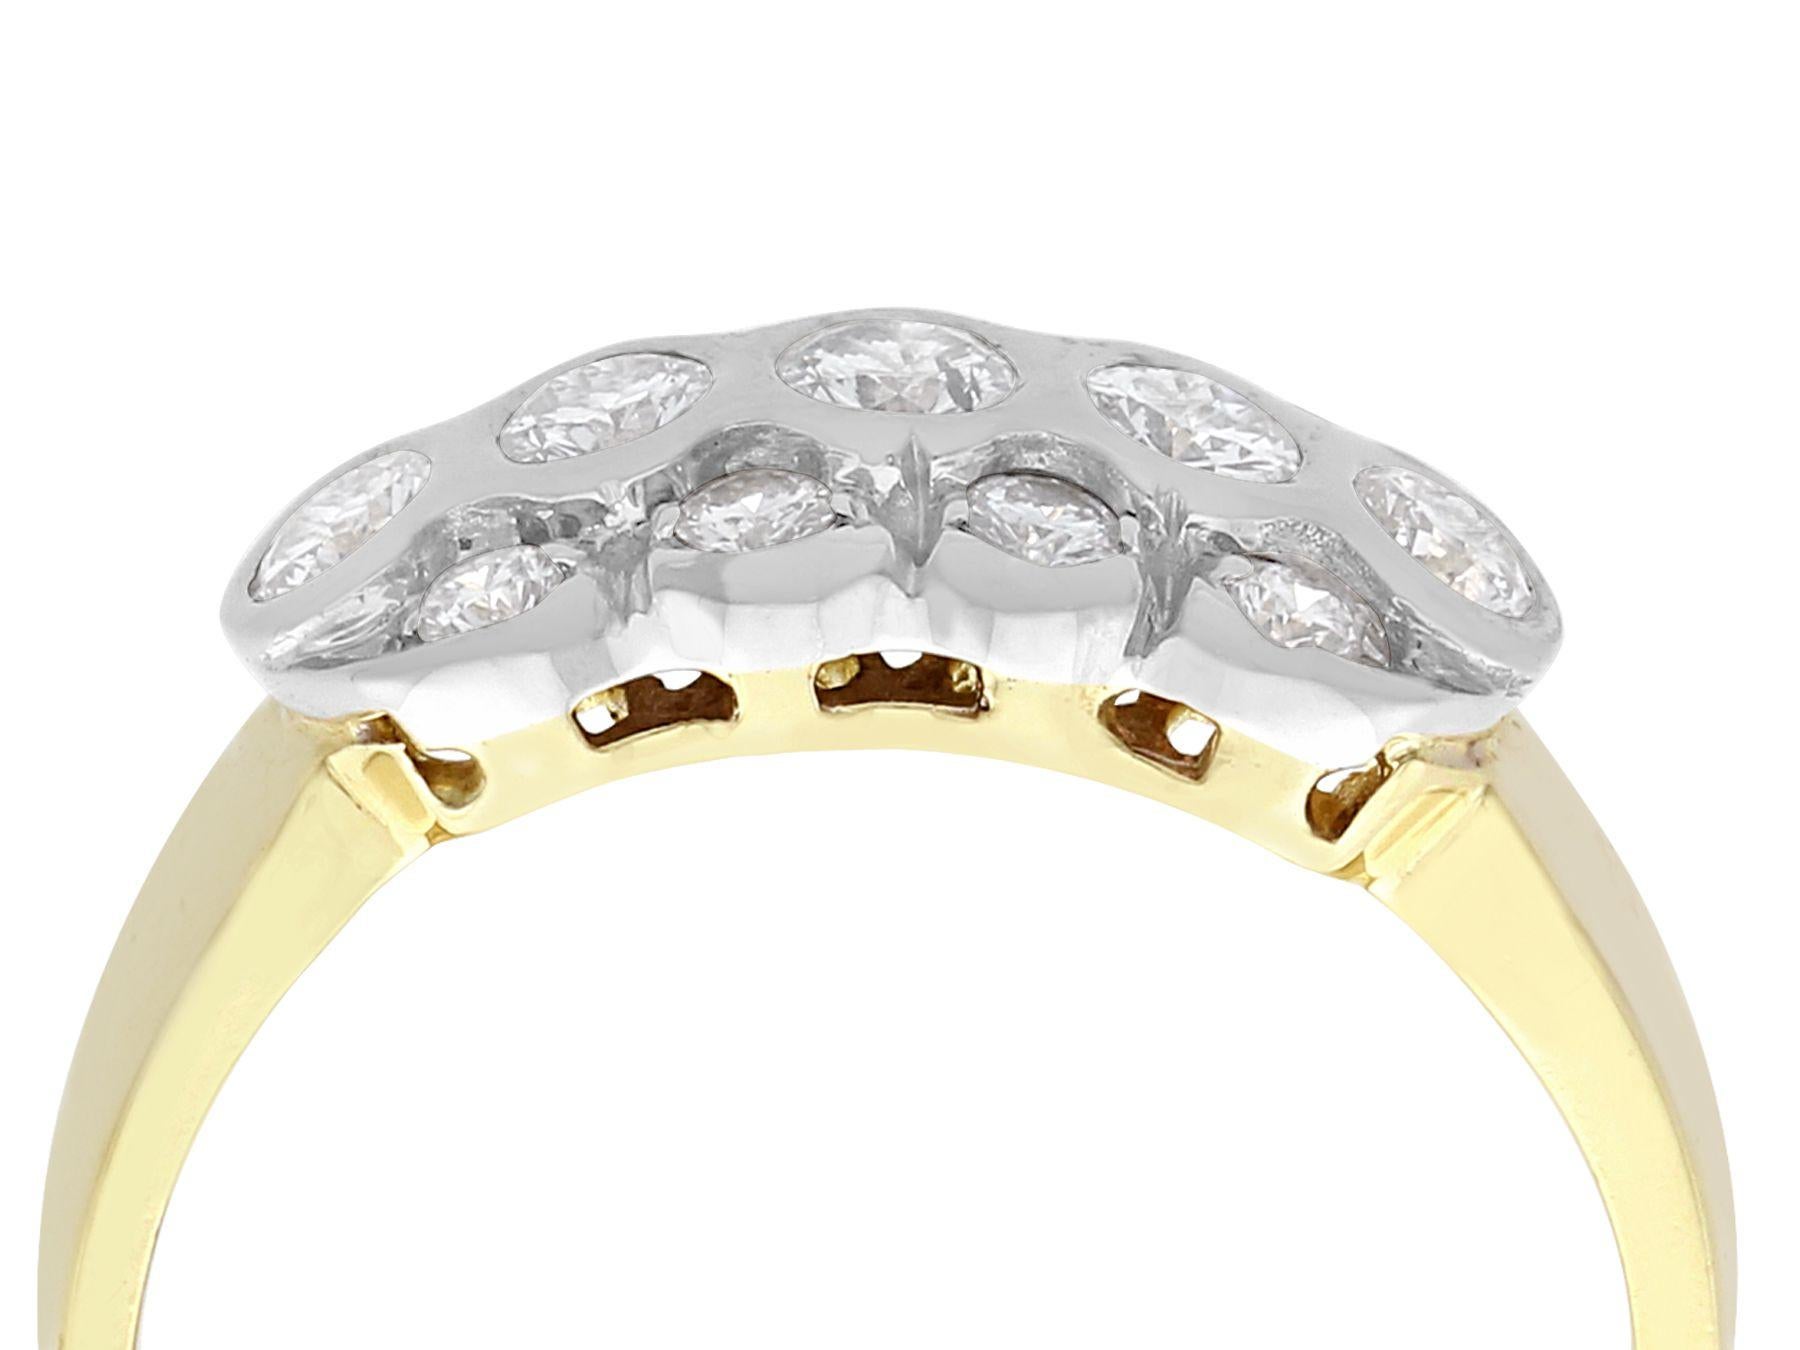 A fine and impressive vintage 0.60 carat diamond and 14 karat yellow gold, 14 karat white gold set cocktail ring; part of our diverse diamond jewelry and estate jewelry collections

This fine and impressive 1970s diamond ring has been crafted in 14k